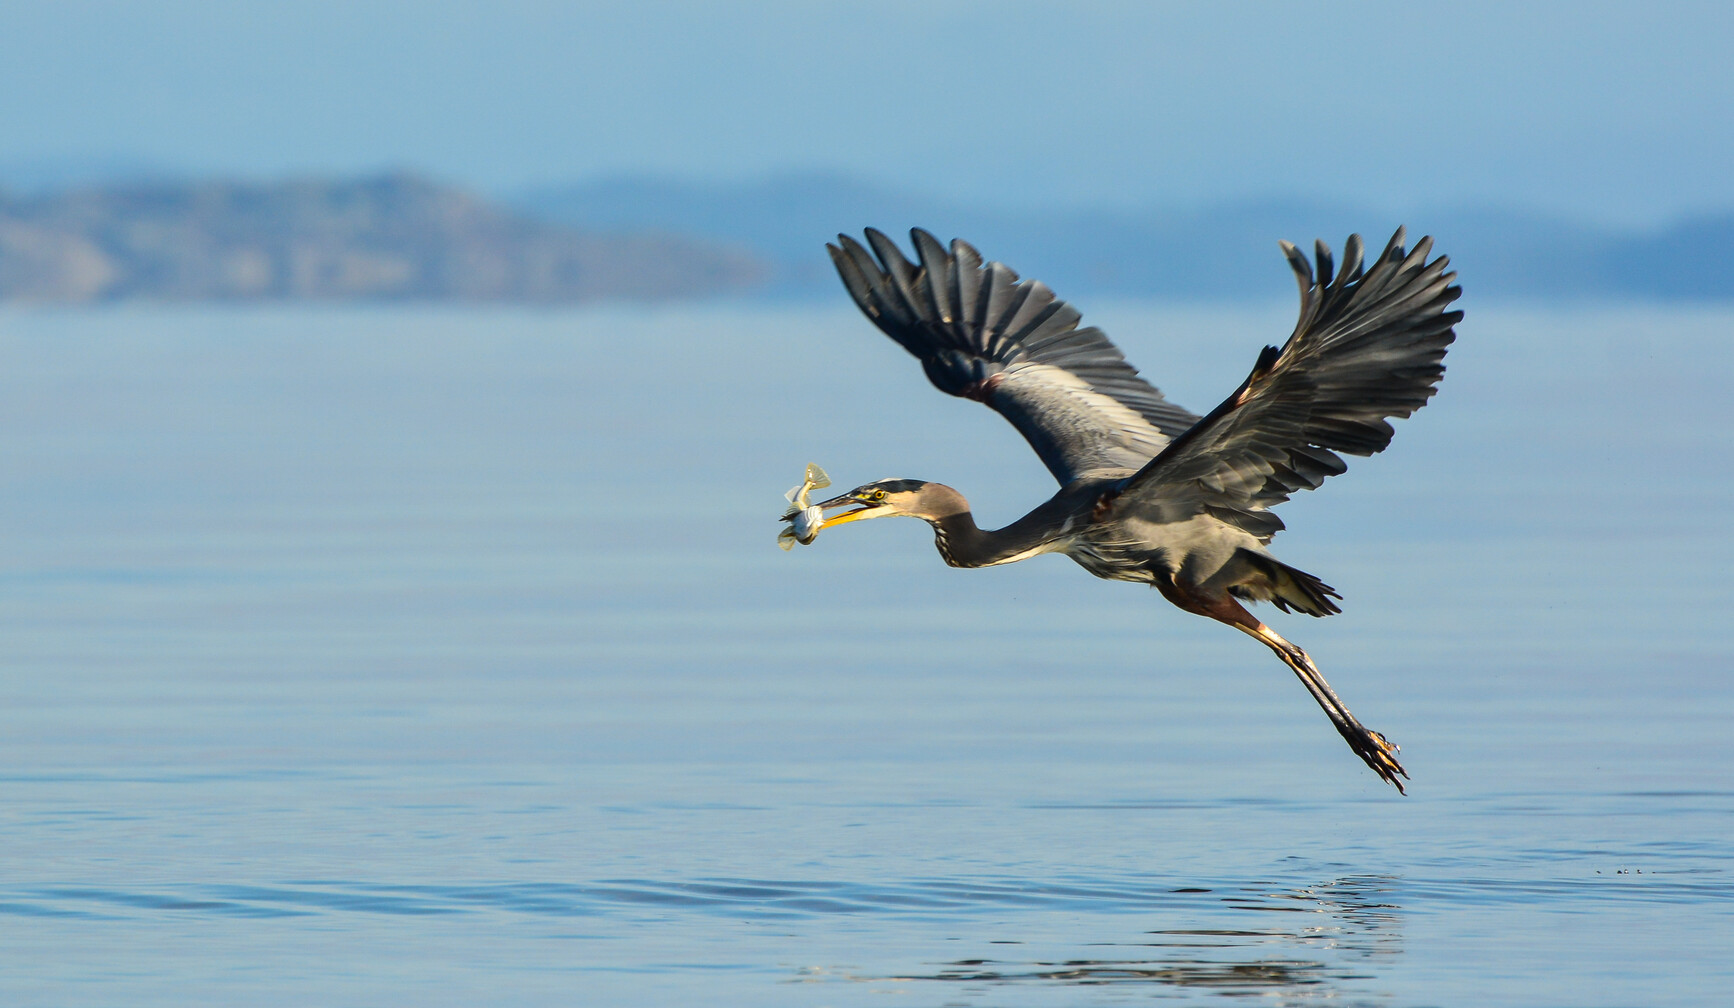 A great blue heron in flight with a fish in its beak. Miracle Beach Park.